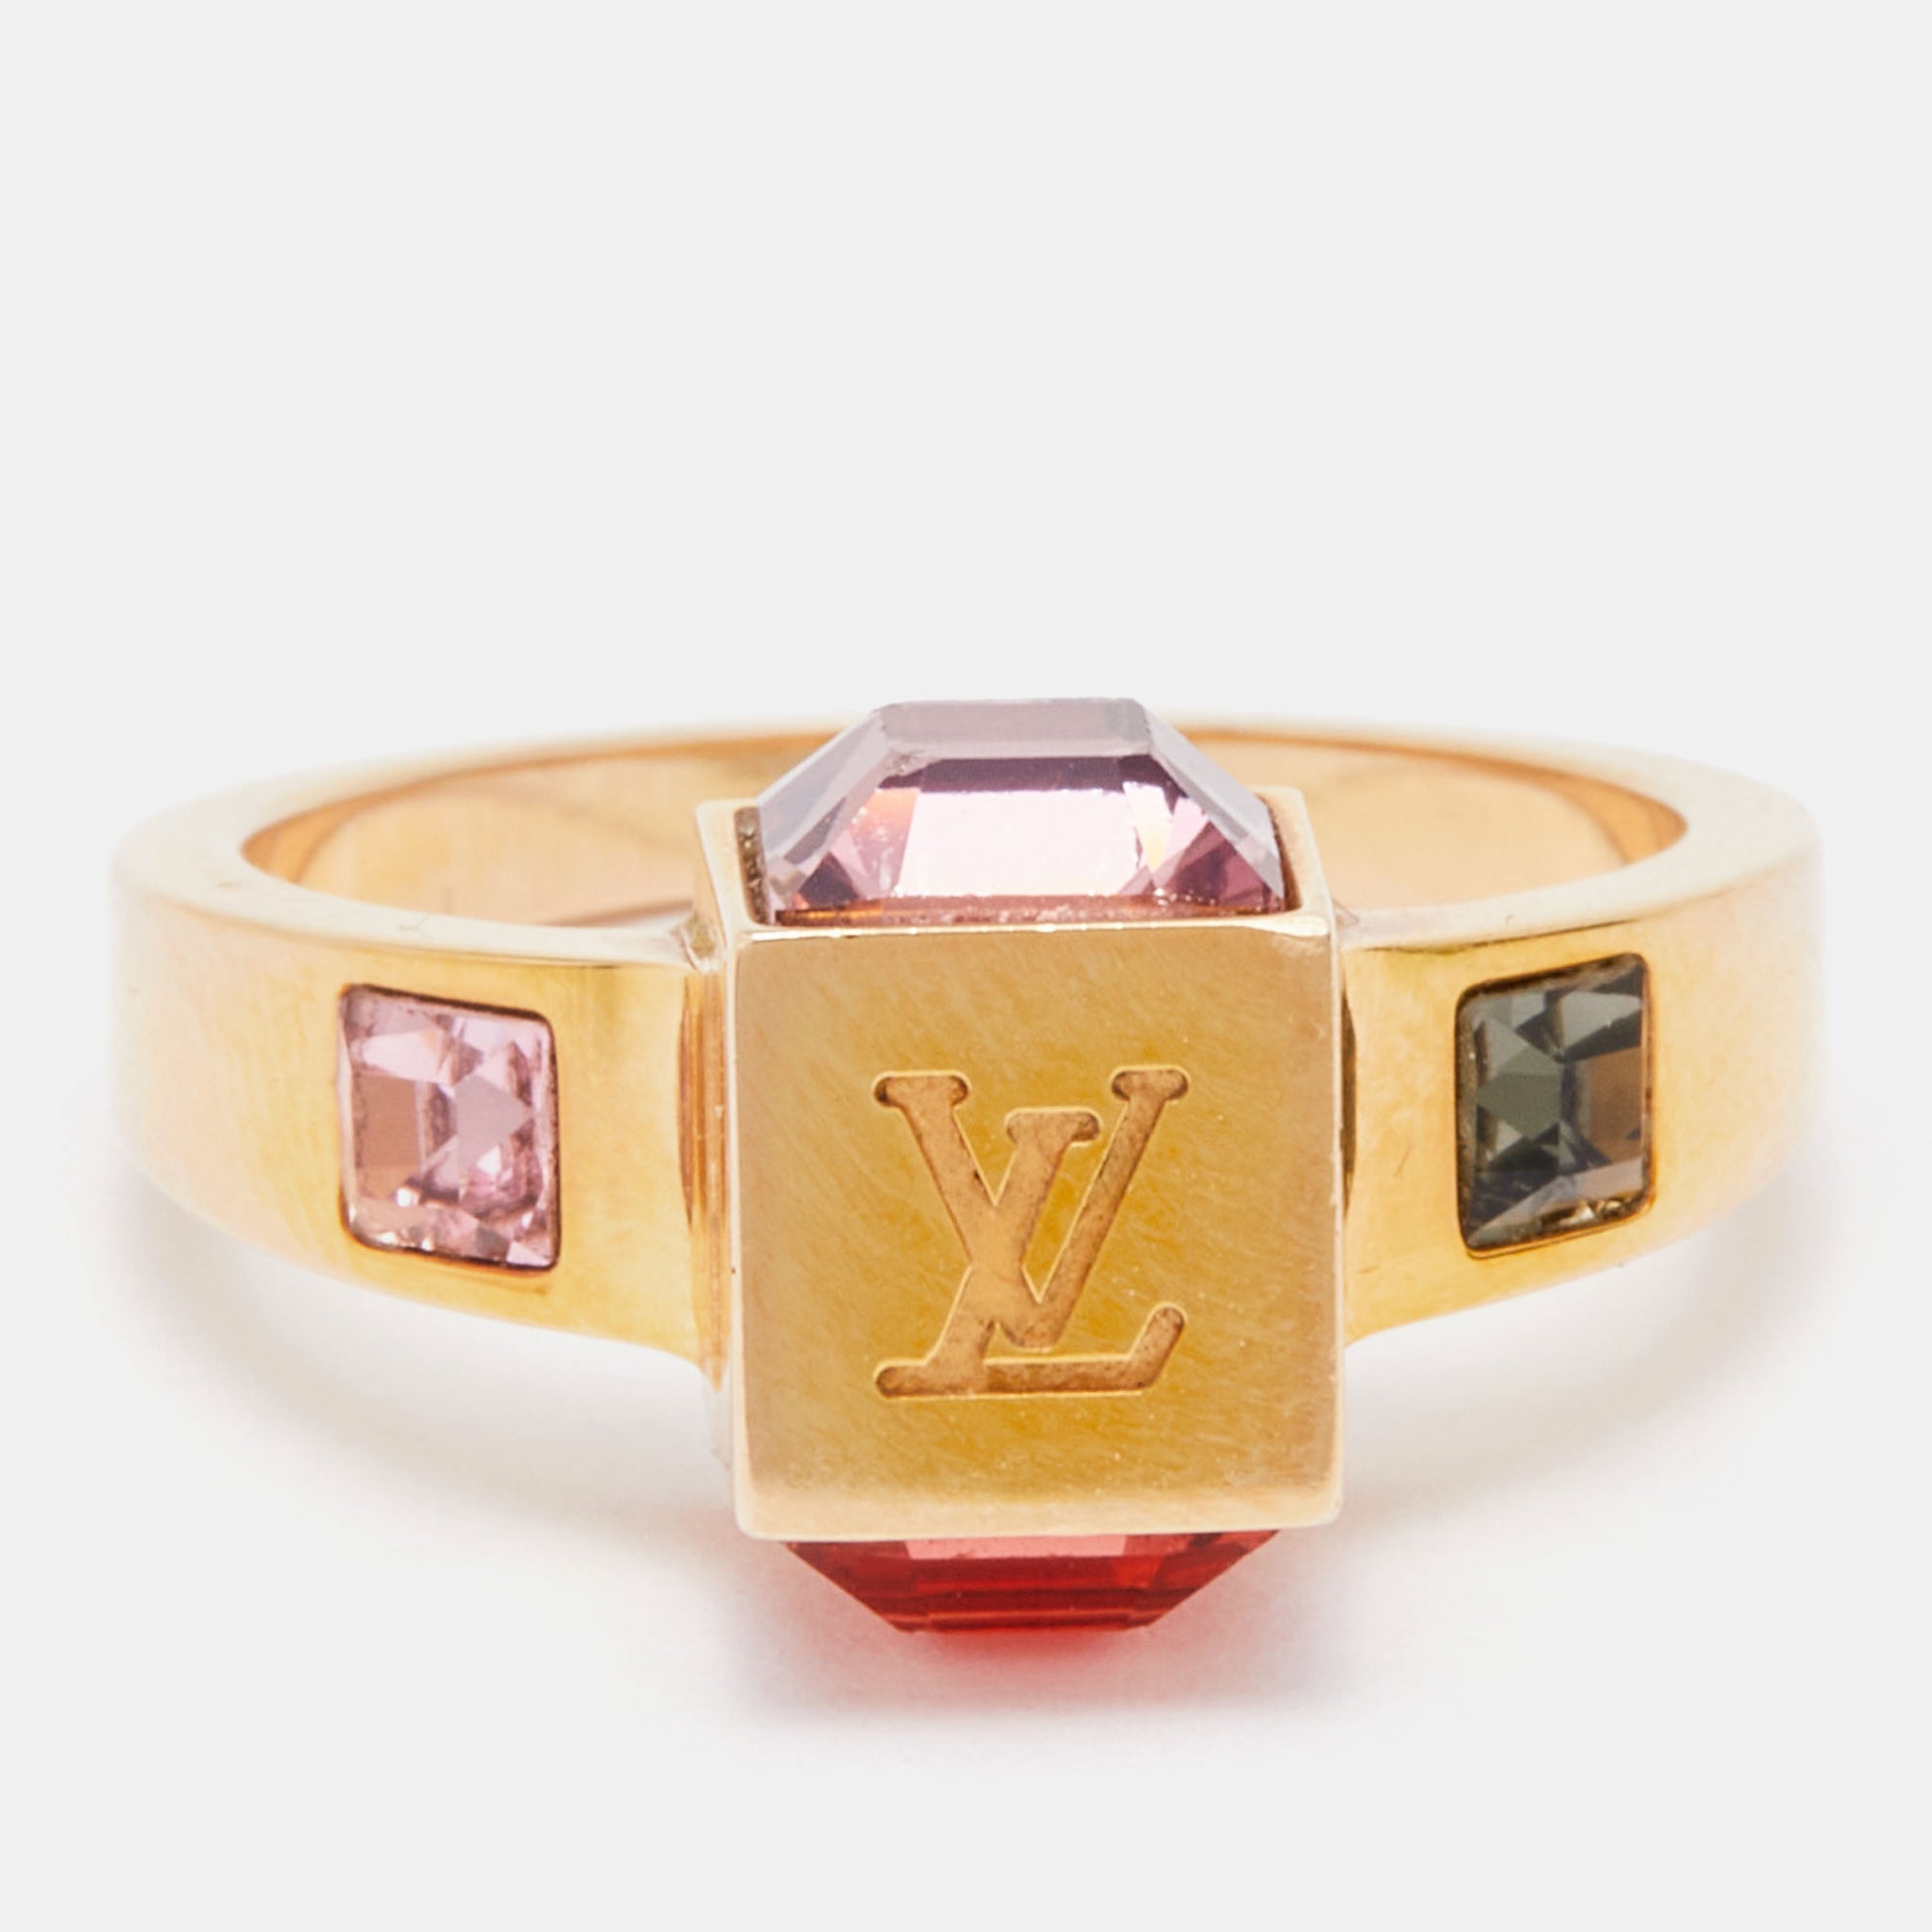 Louis Vuitton - Authenticated Ring - Metal Gold for Women, Good Condition